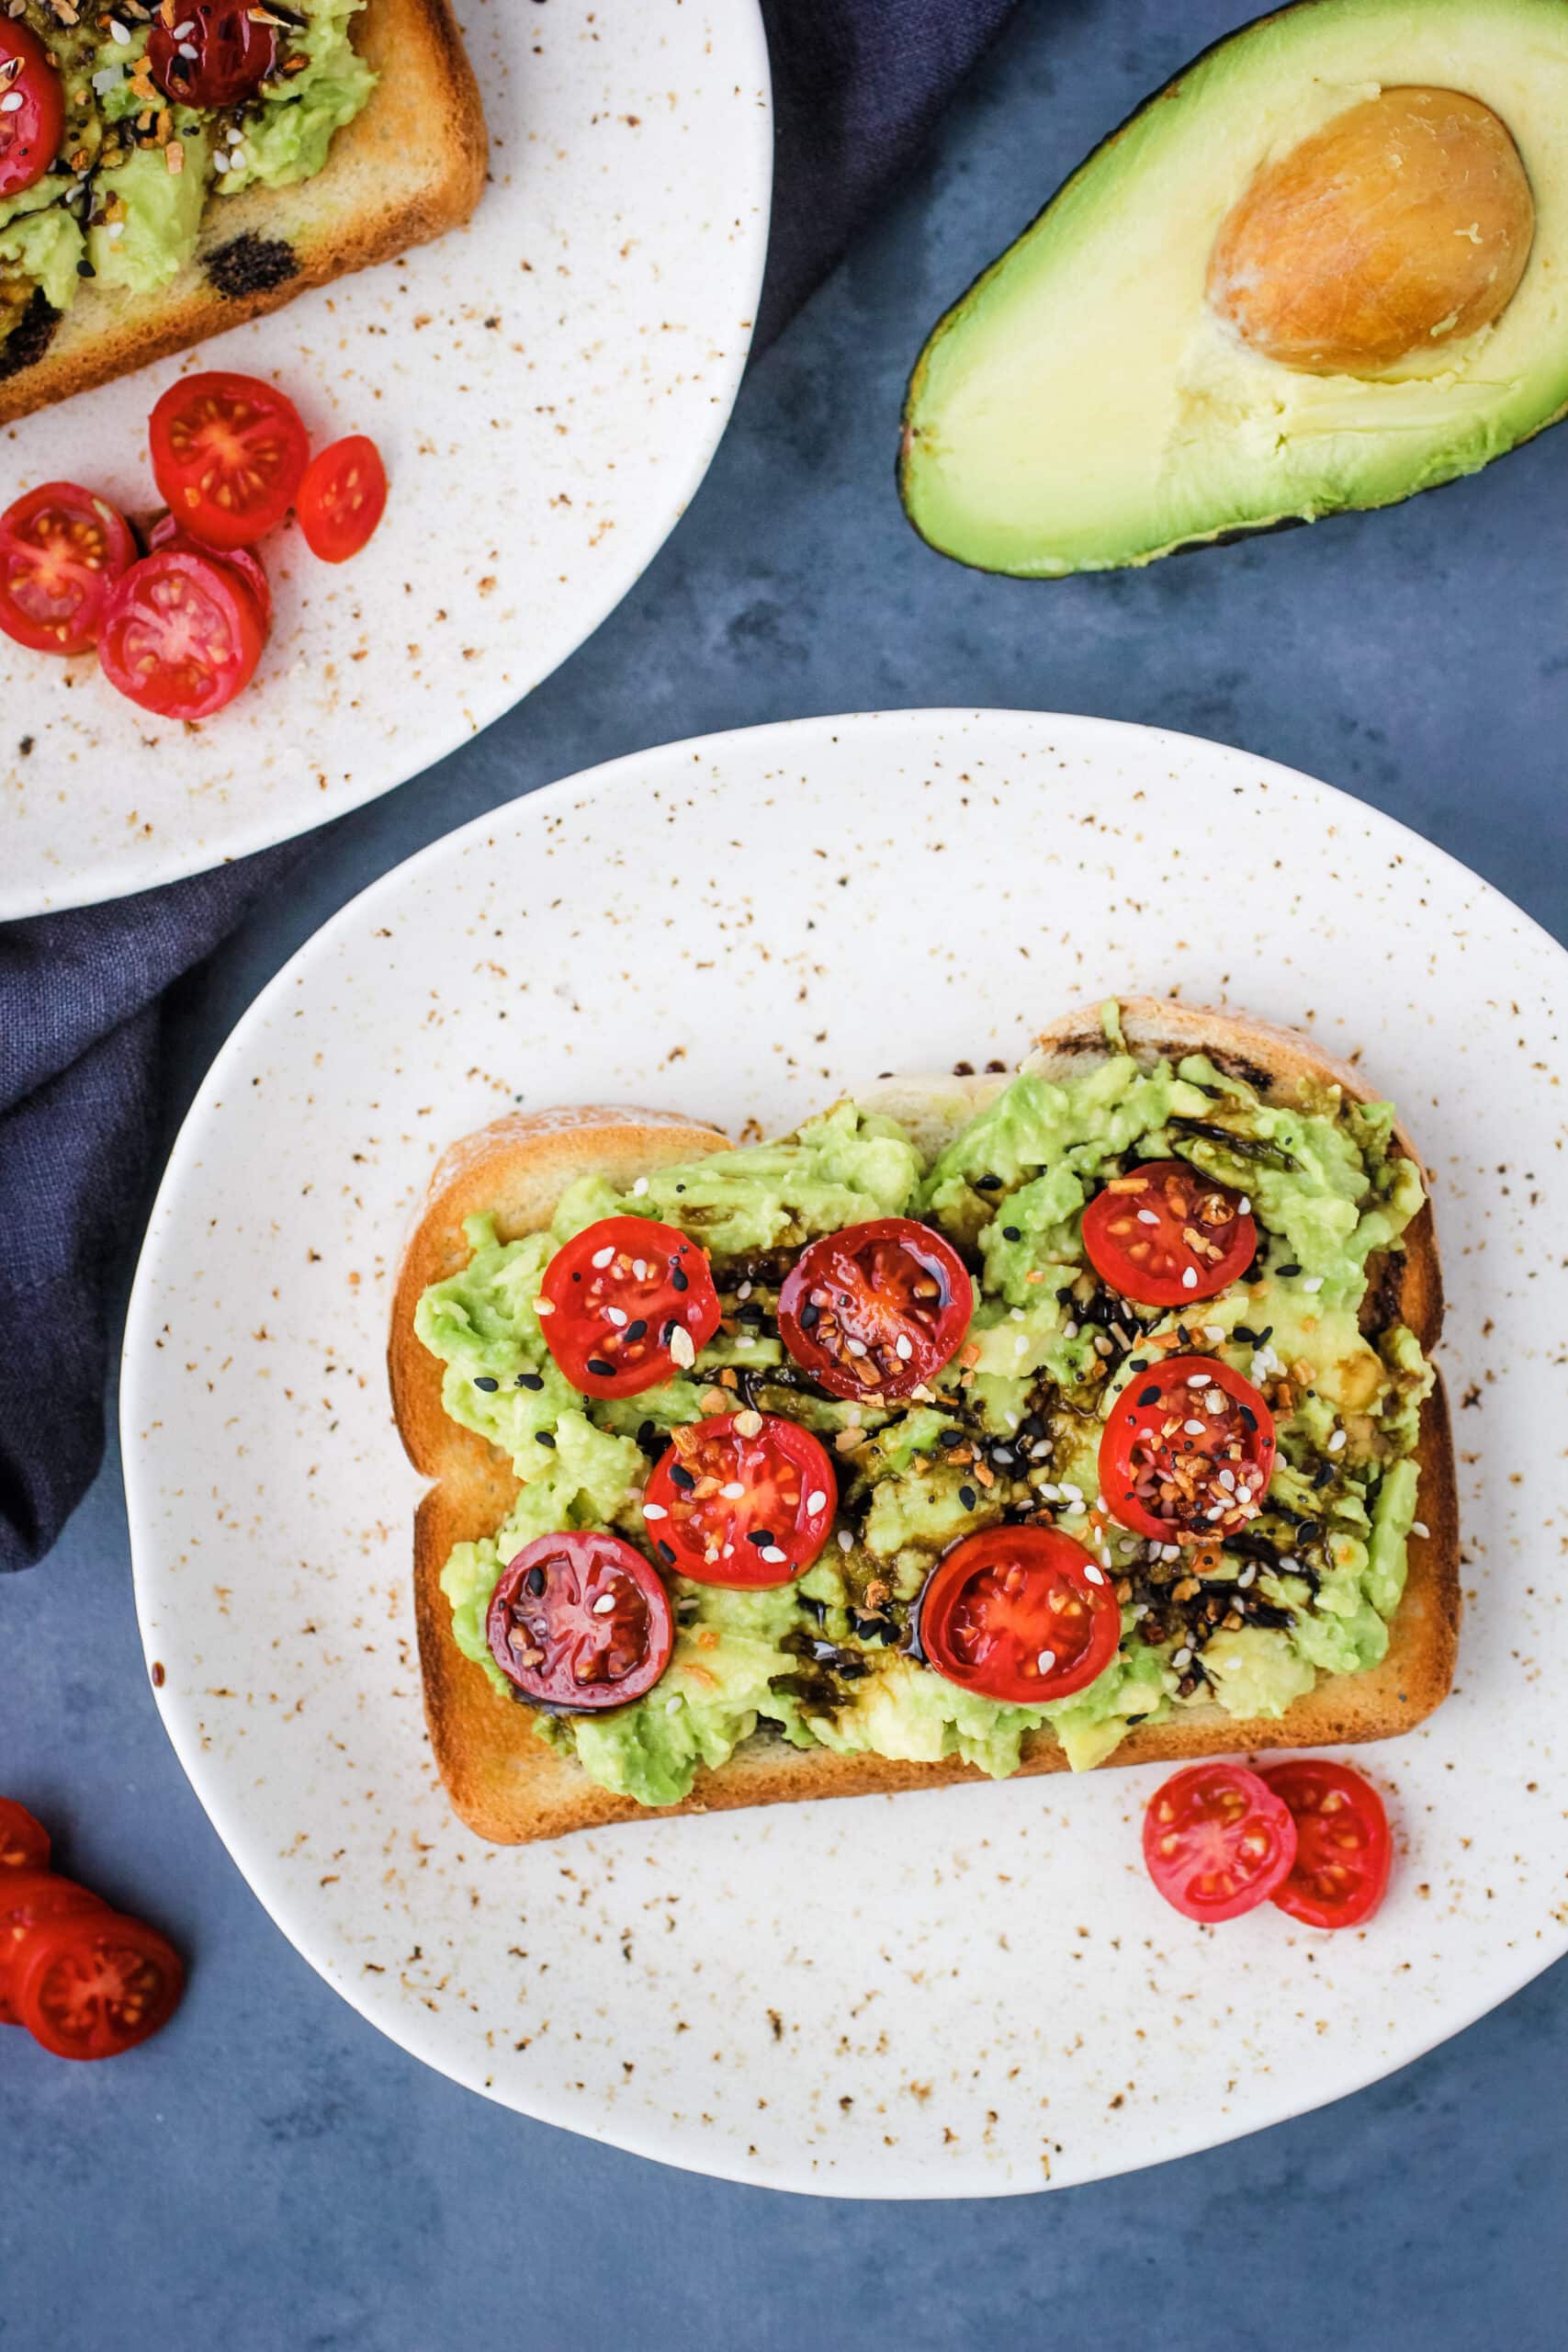 Avocado Toast with Balsamic Glaze - Cooking Up Memories